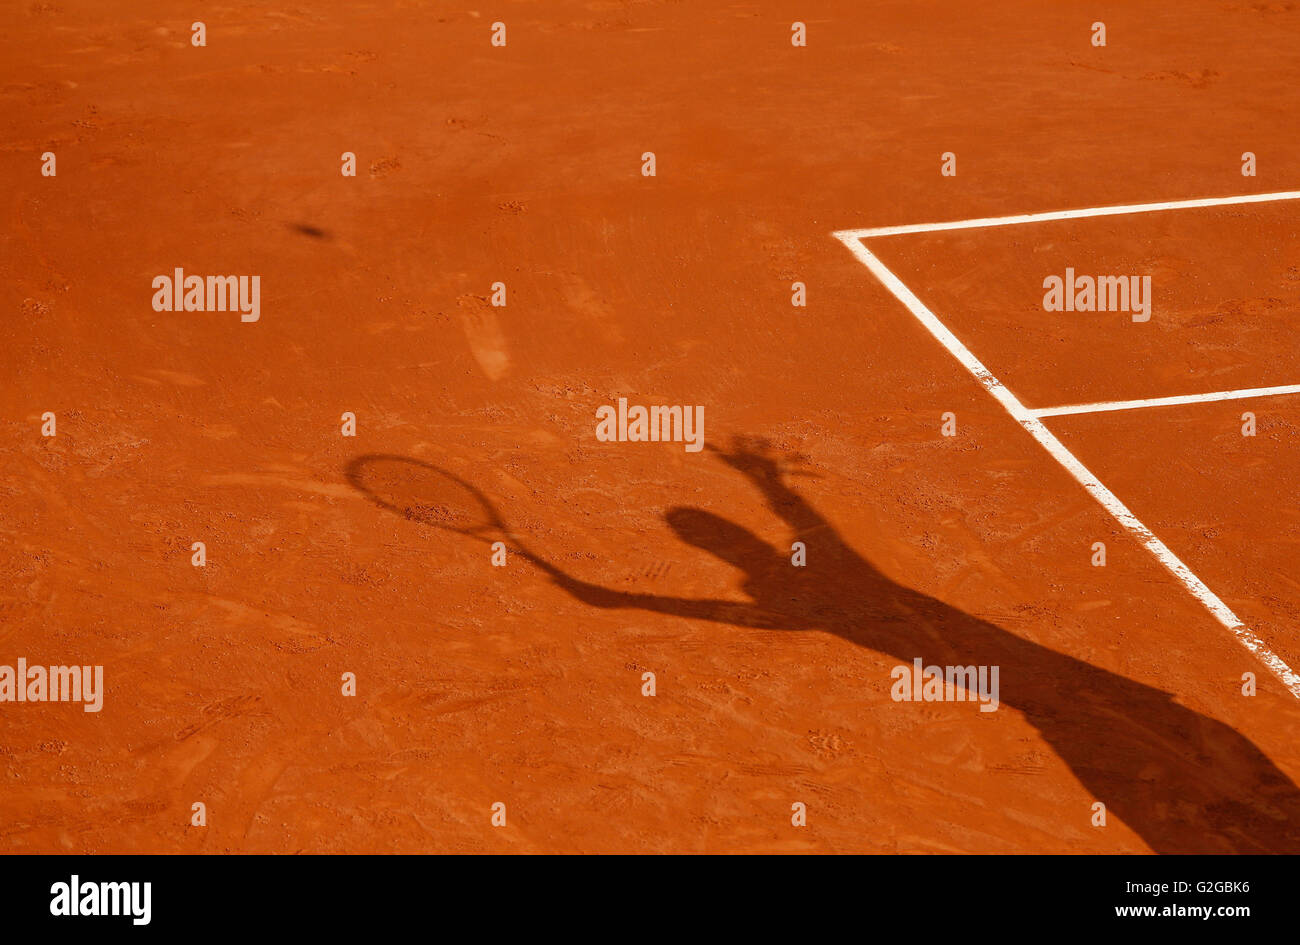 Shadow of a tennis player serving the ball, French Open 2013, ITF Grand Slam Tennis Tournament, Roland Garros Stock Photo